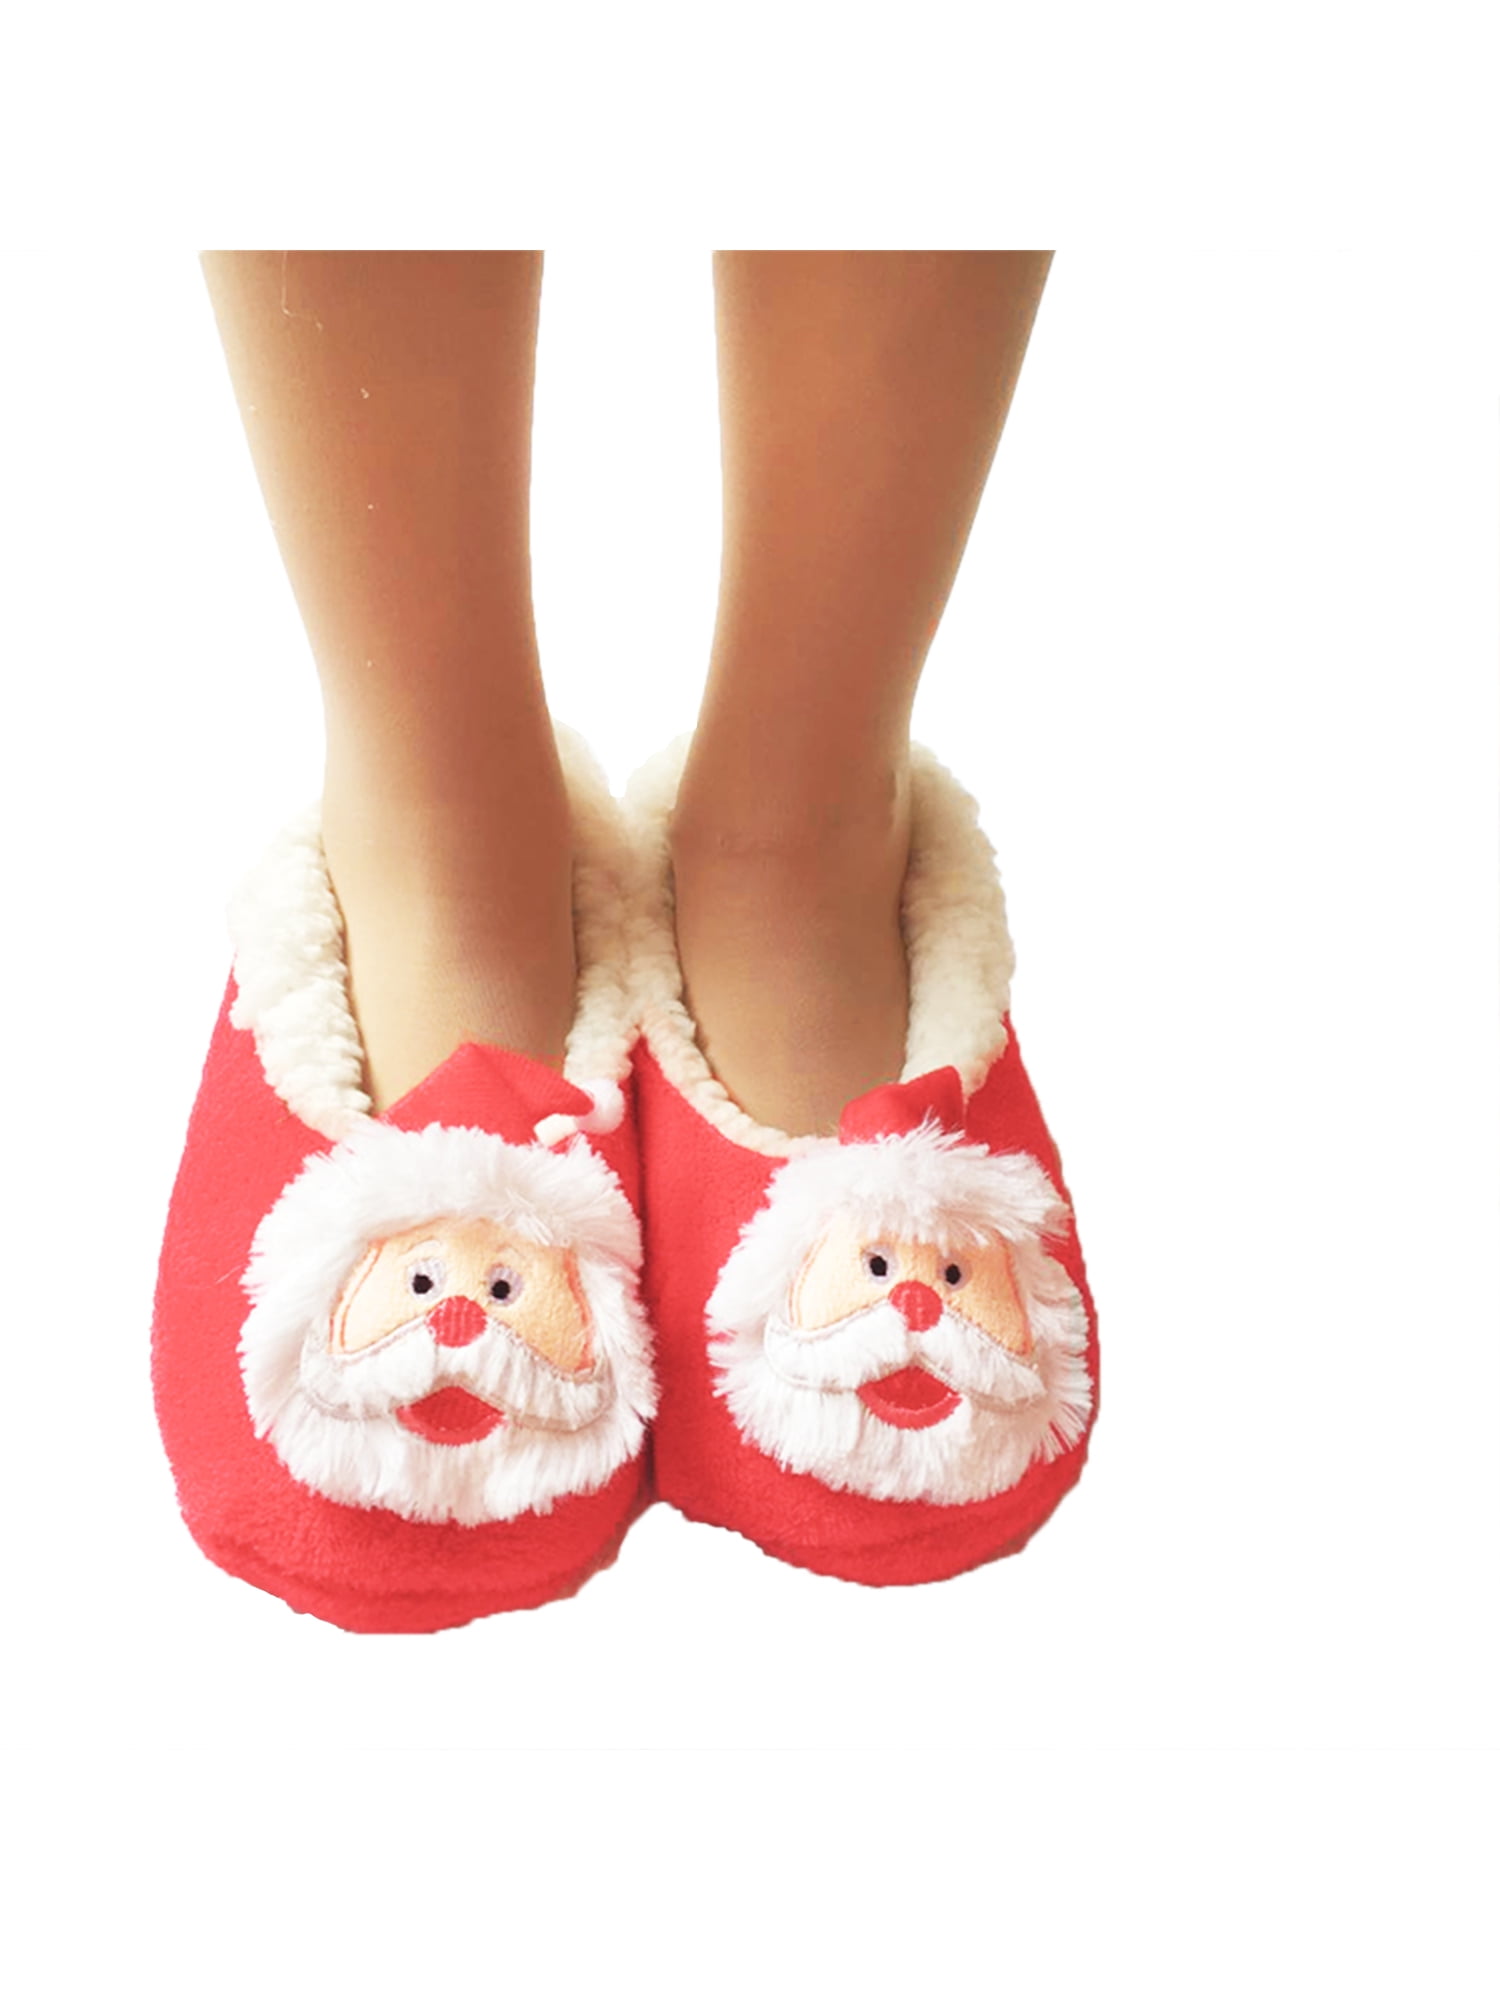 christmas house slippers